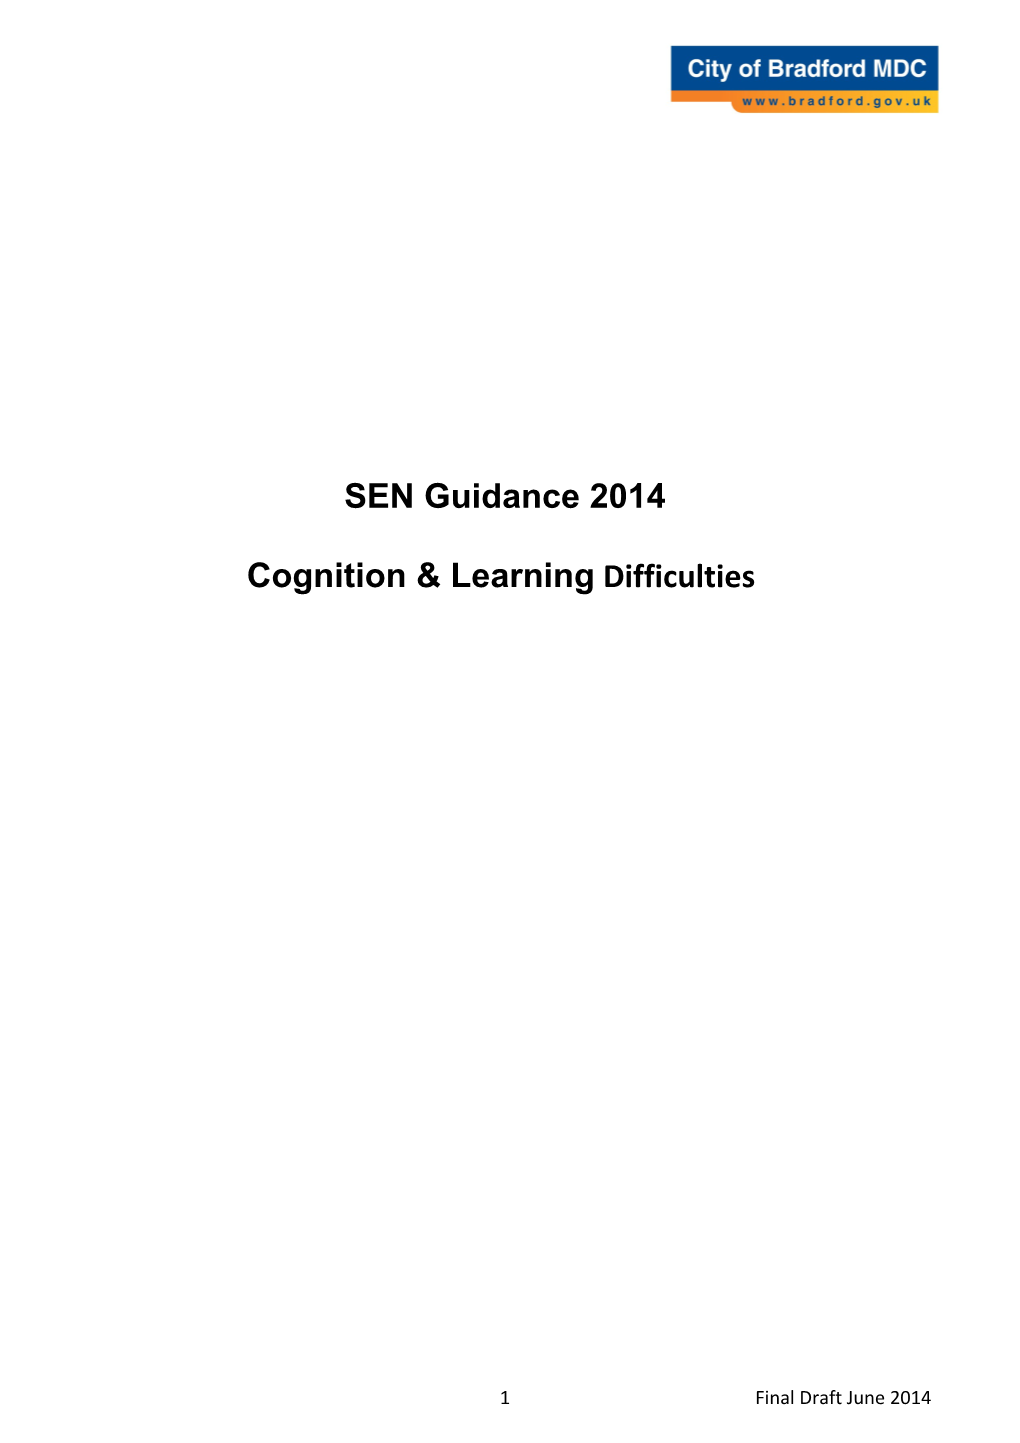 Social, Emotional and Behavioural Difficulties Guidance